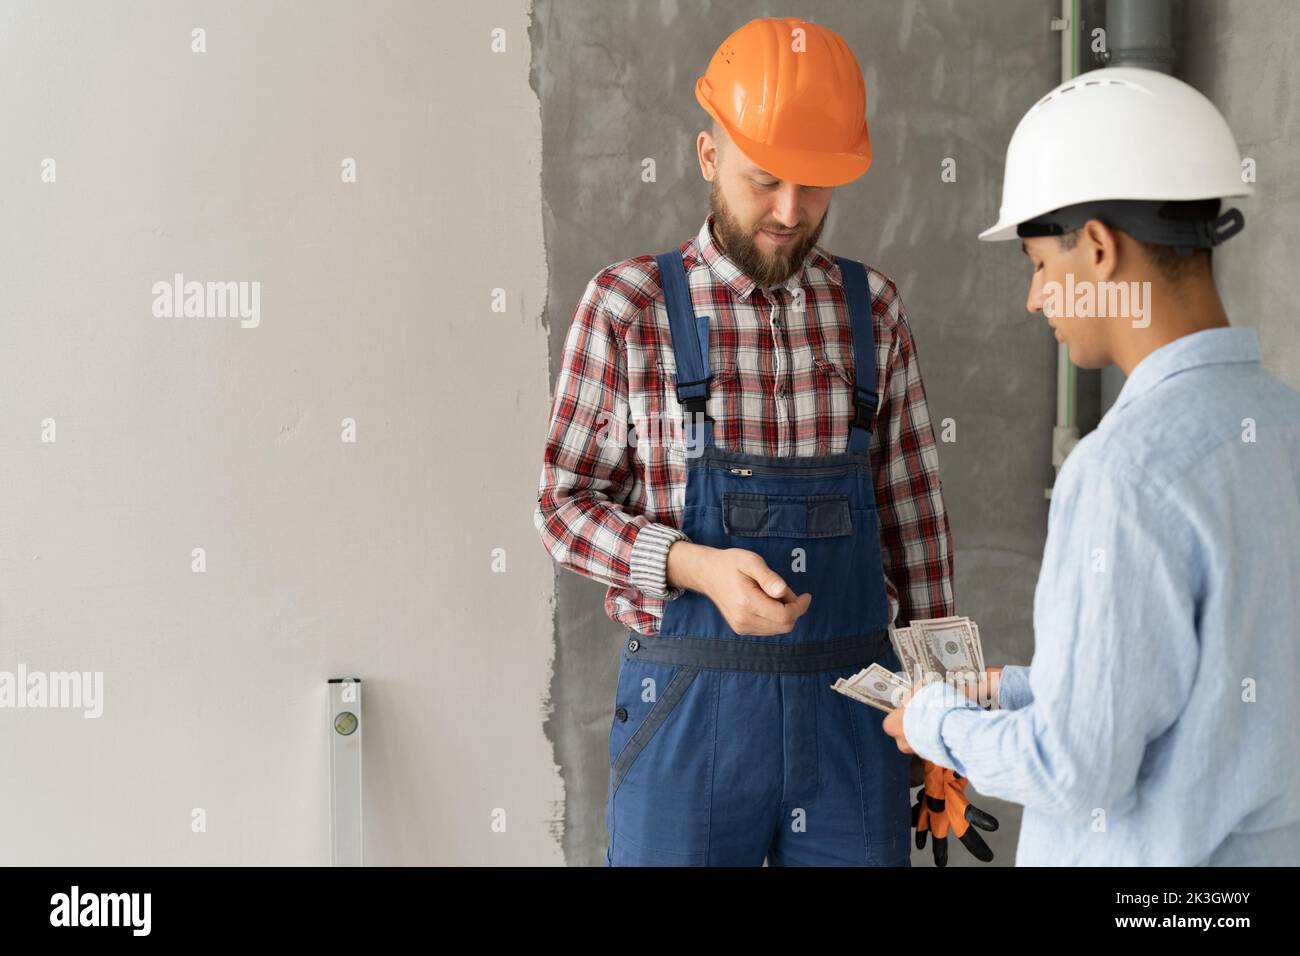 Payday. Illegal Construction Worker Receiving Customer's Money, civil engineer giving money to a worker at a construction site. Paying House Repair De Stock Photo